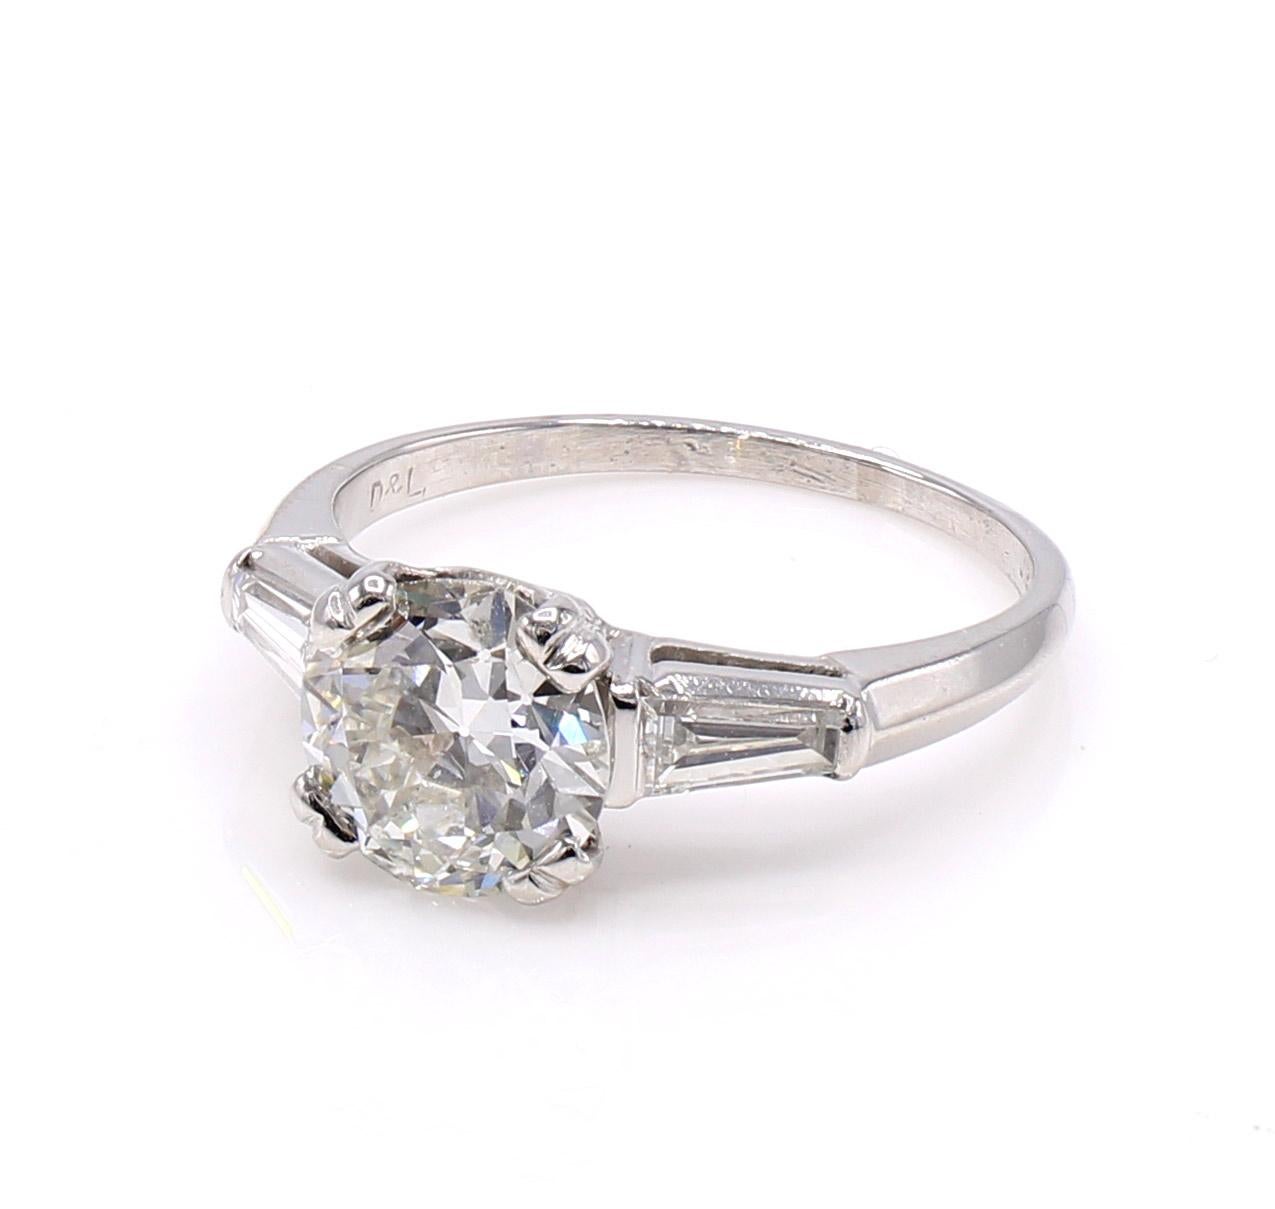 Beautifully cut lively and brilliant Old European Cut diamond set in a handcrafted platinum ring mount embellished by 2 bright white tapered baguettes on either side of the shank. The Old European Cut diamond weighing 1.62 carats has a wonderful